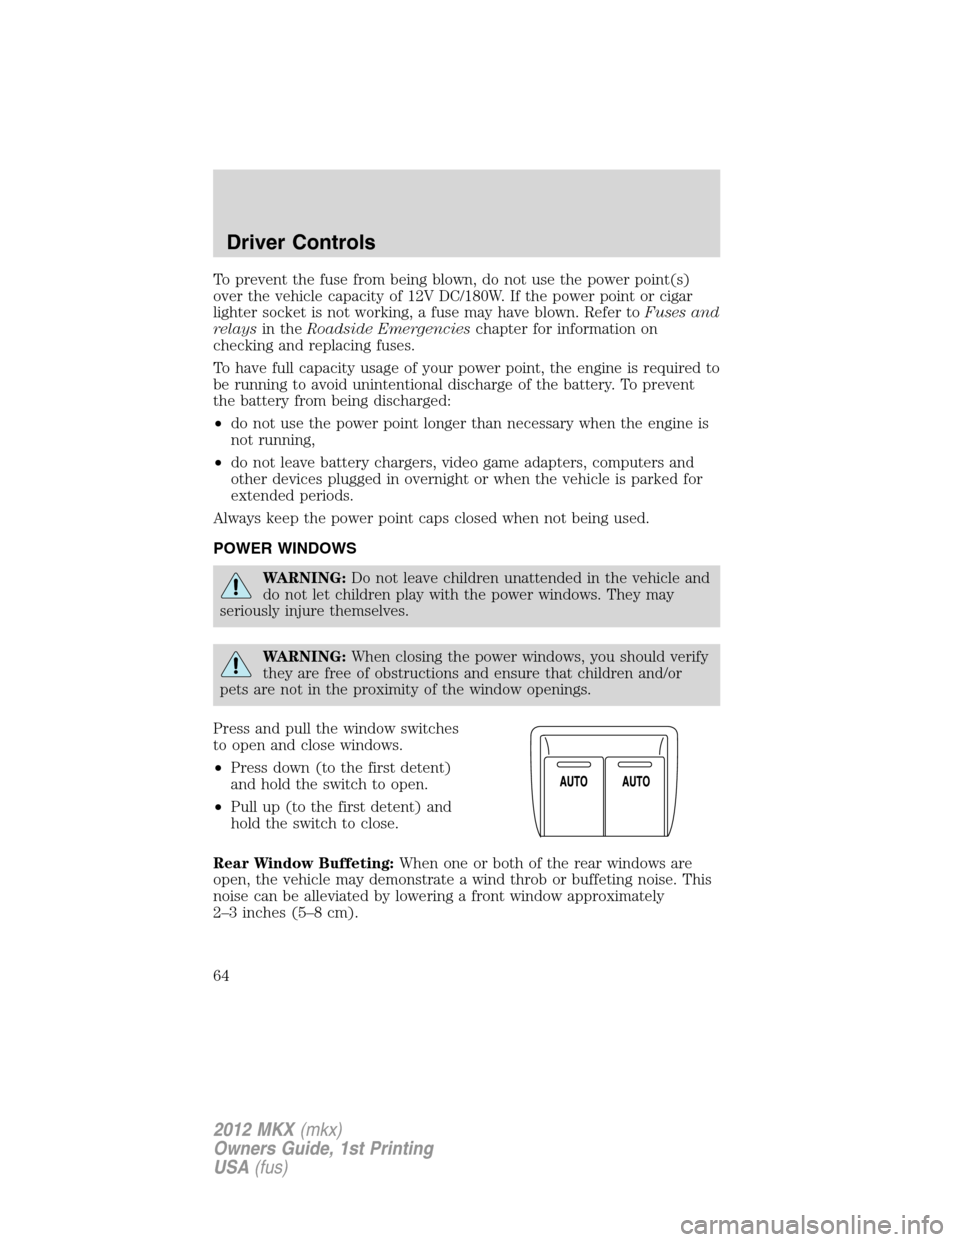 LINCOLN MKX 2012  Owners Manual To prevent the fuse from being blown, do not use the power point(s)
over the vehicle capacity of 12V DC/180W. If the power point or cigar
lighter socket is not working, a fuse may have blown. Refer to